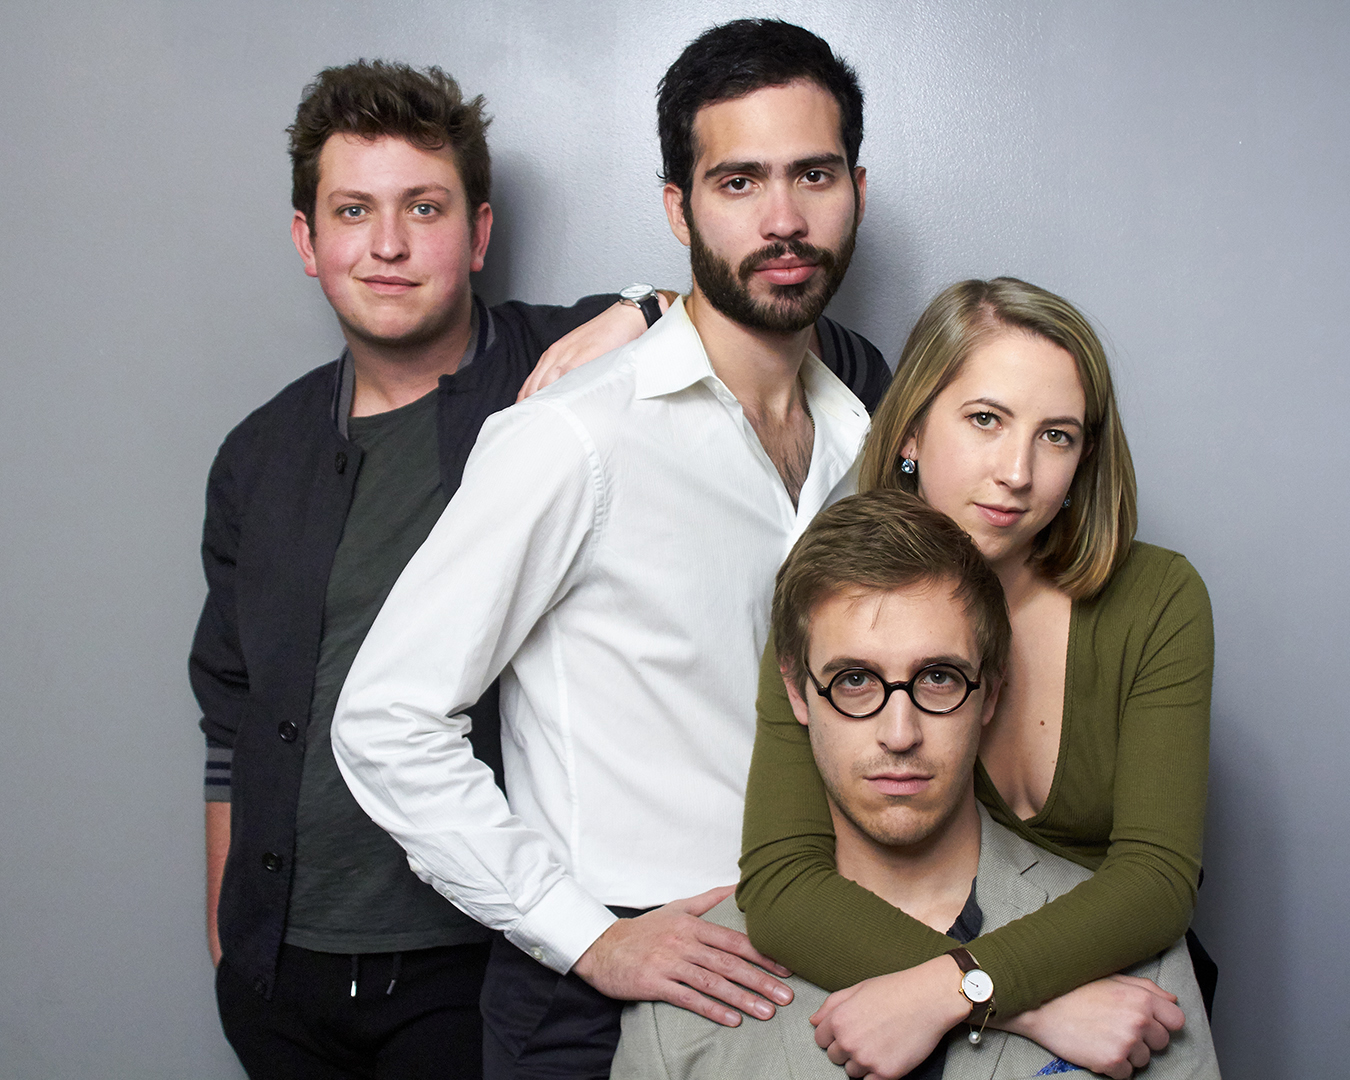 The full cast (From left to right, James Clements, Jorge Morales Picó, Ana Cristina Schuler and Sam Hood Adrain (Pablo Calderón-Santiago)